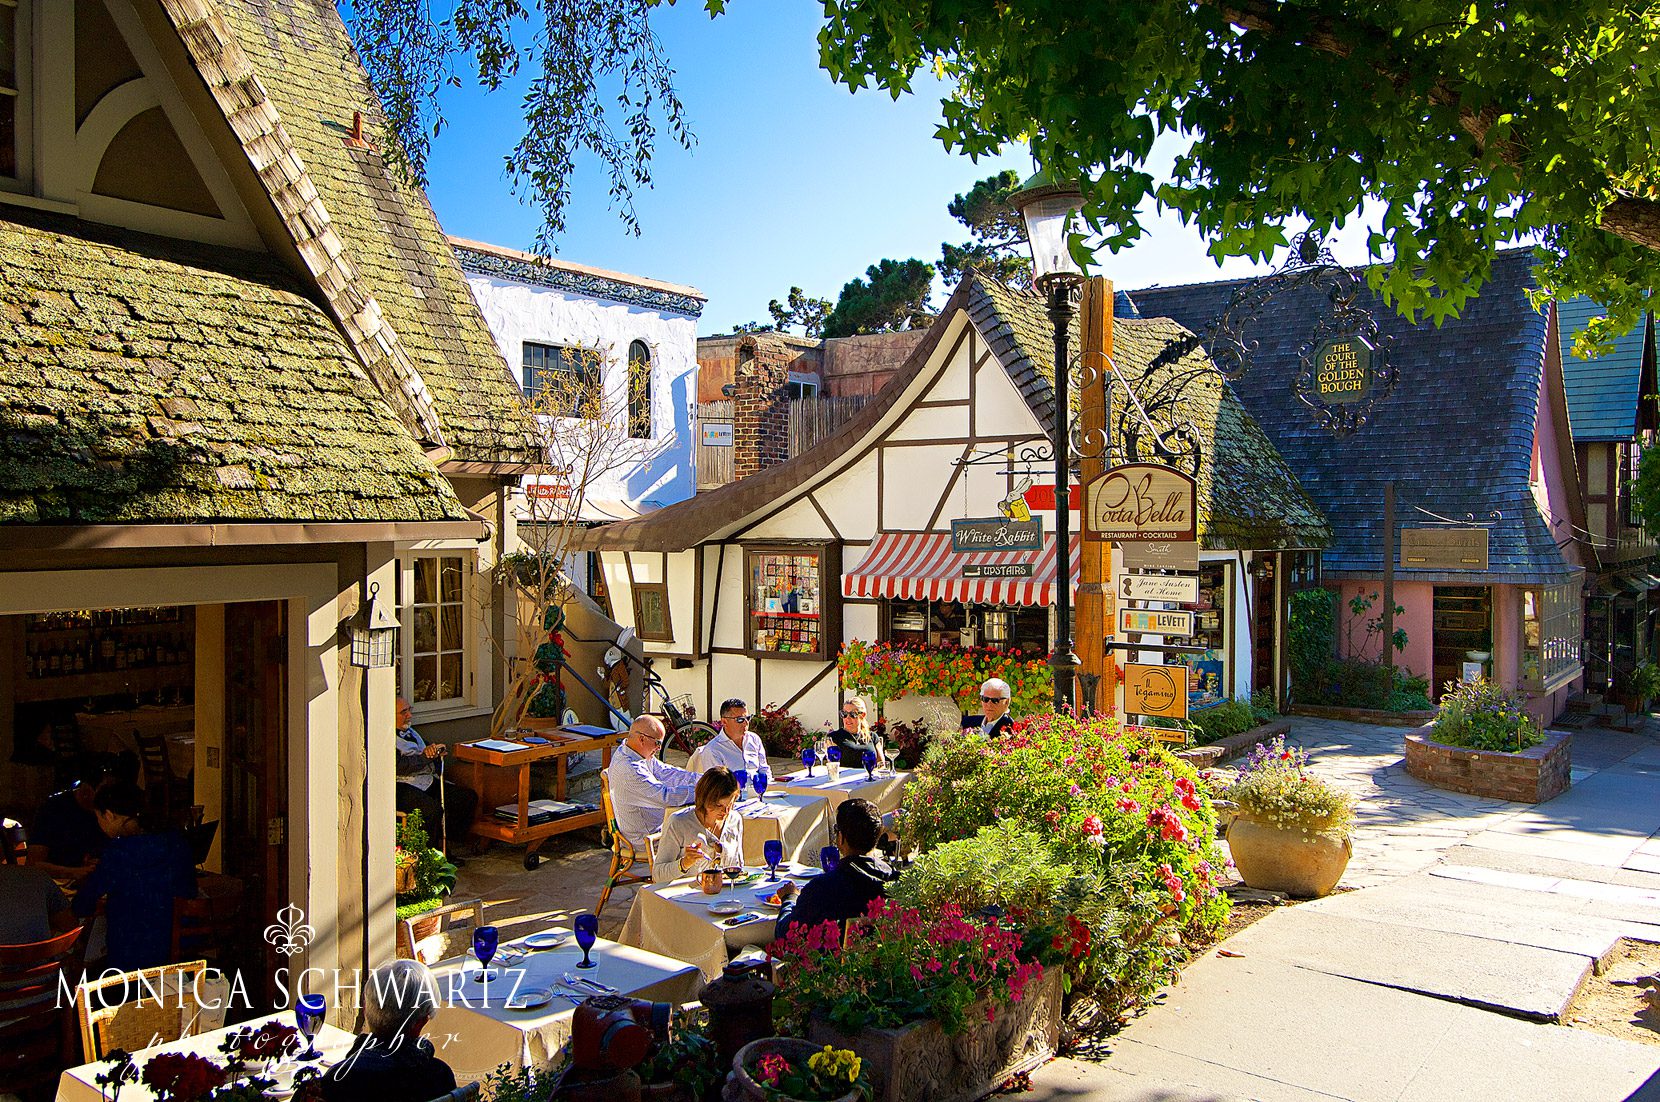 The-Court-of-the-Golden-Bough-in-Carmel-California